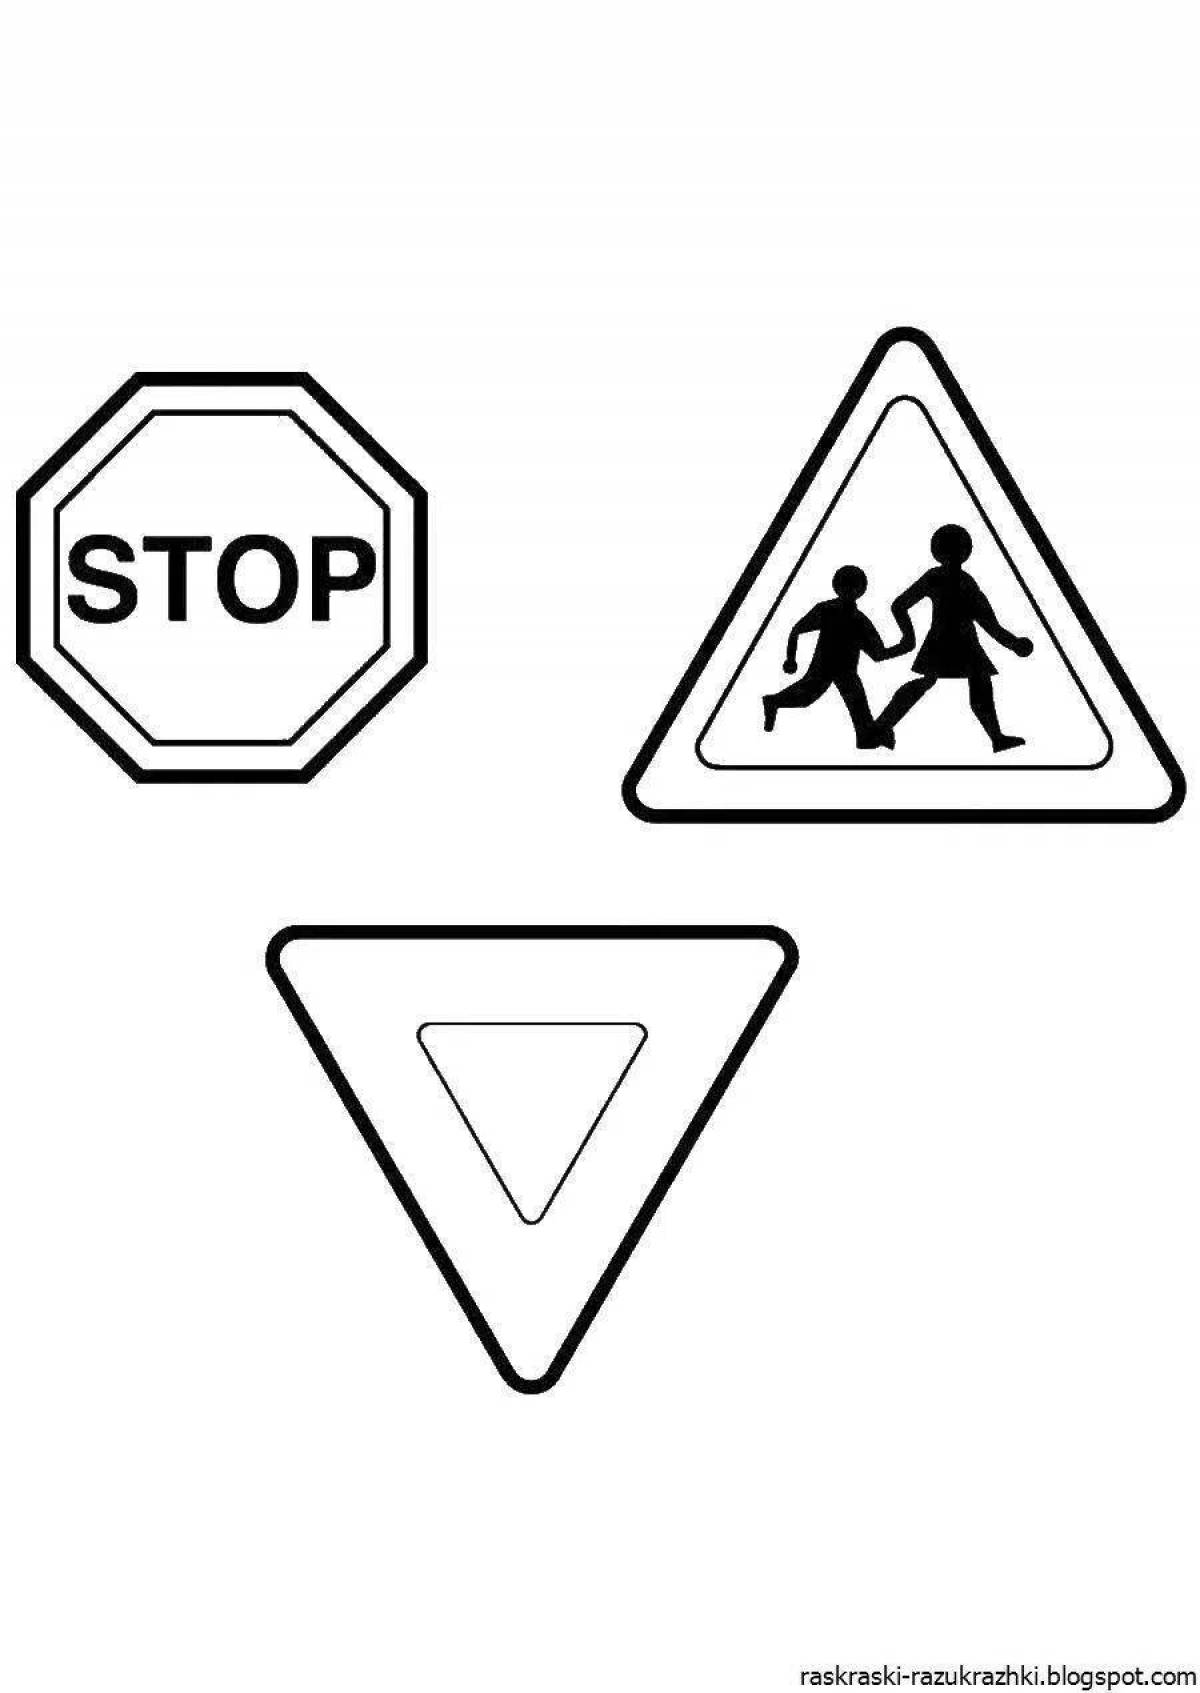 Cool road signs coloring page